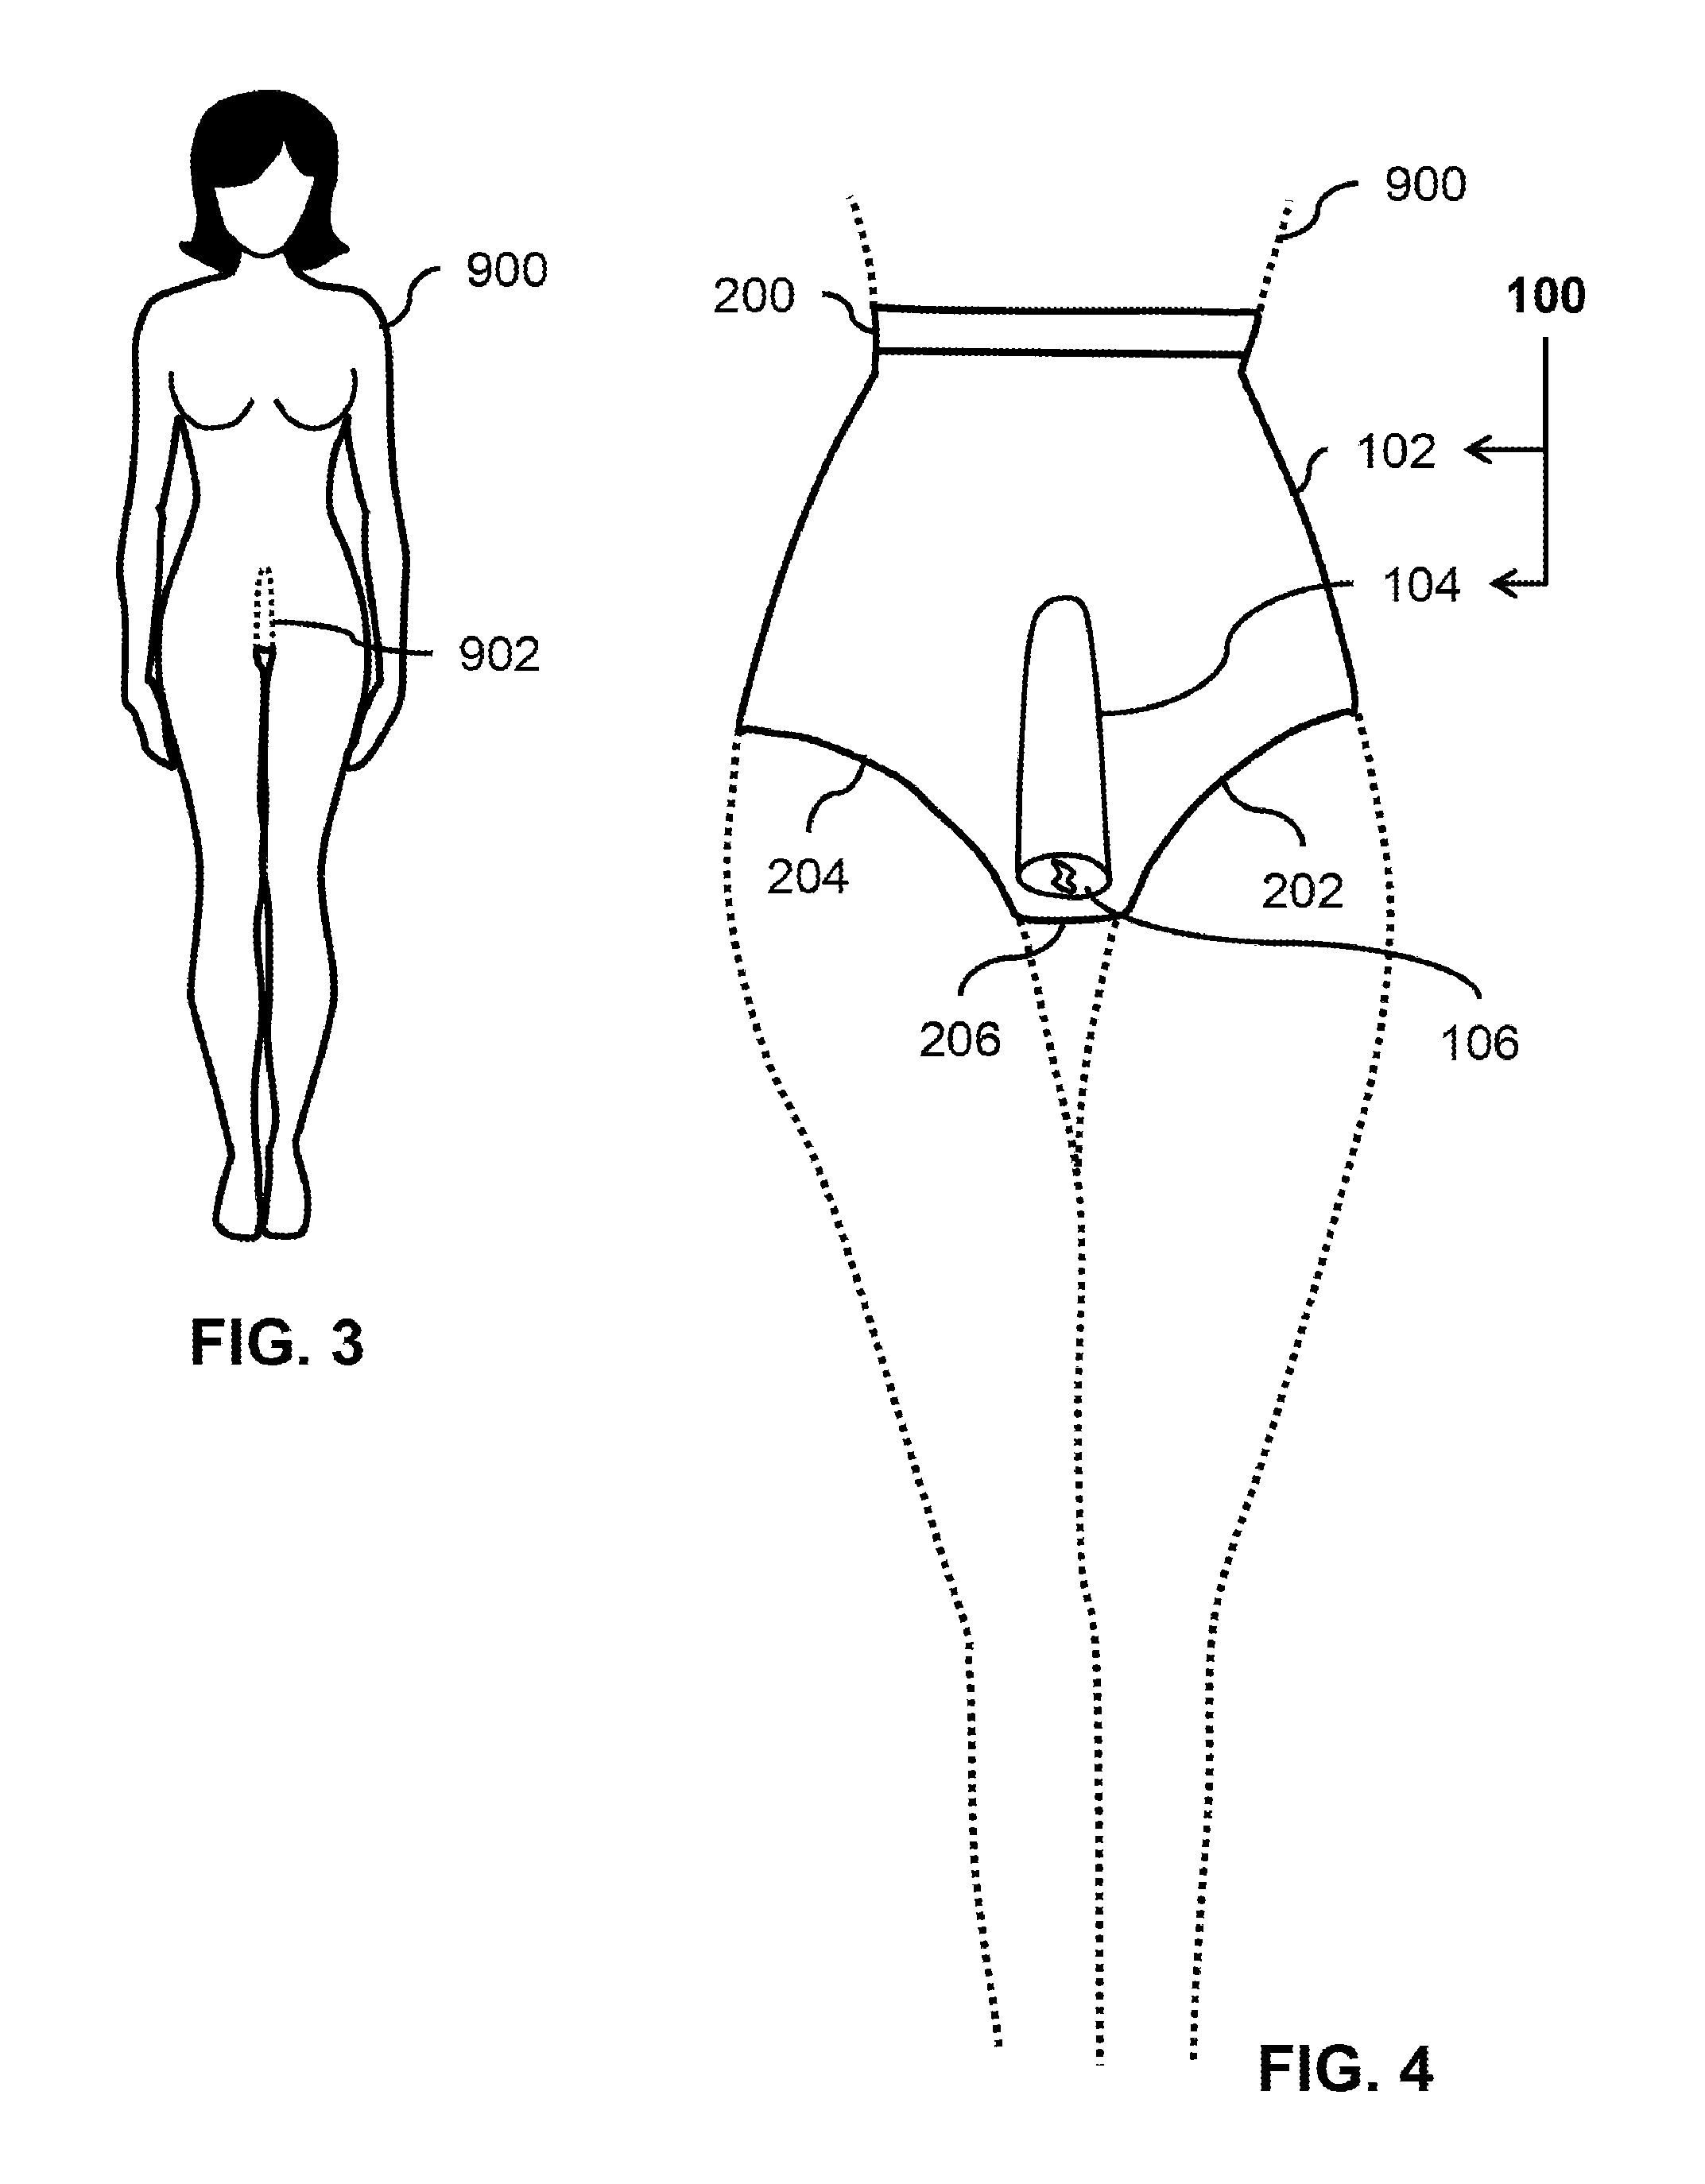 Apparatus for sexual activity usage